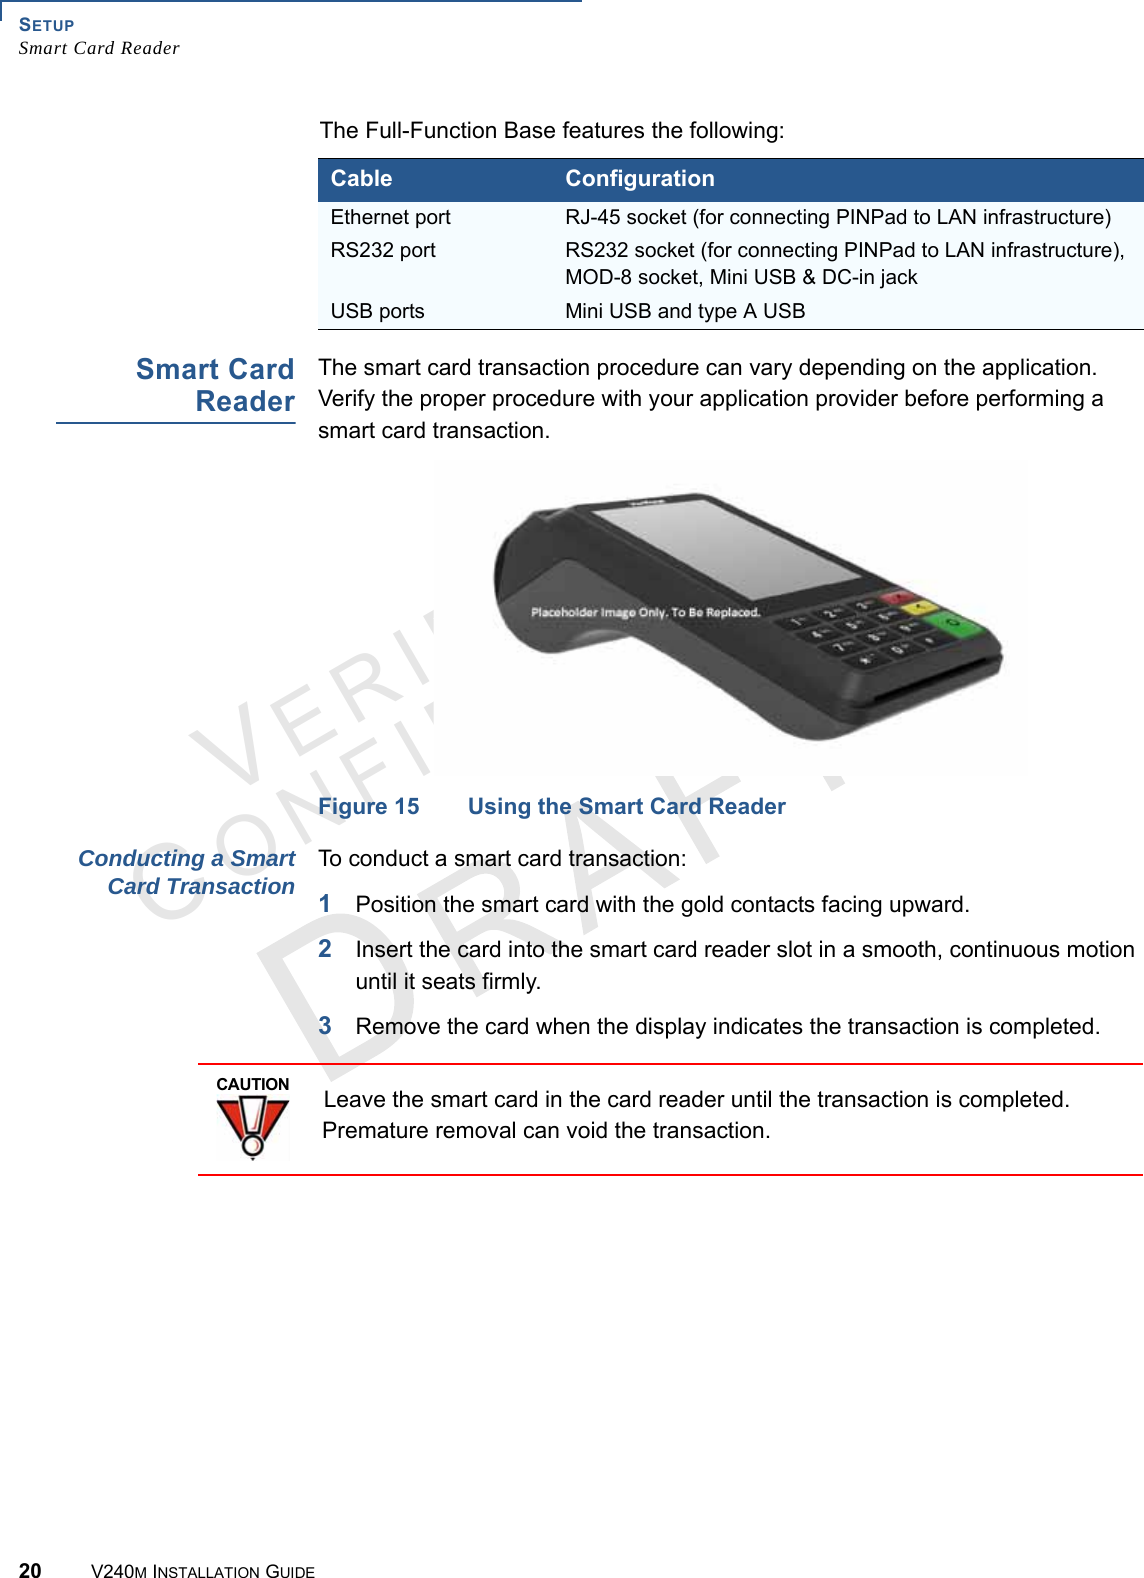 SETUP Smart Card Reader20 V240M INSTALLATION GUIDEVERIFONECONFIDENTIAL The Full-Function Base features the following:Smart Card Reader The smart card transaction procedure can vary depending on the application. Verify the proper procedure with your application provider before performing a smart card transaction.Figure 15 Using the Smart Card ReaderConducting a Smart Card Transaction To conduct a smart card transaction:1Position the smart card with the gold contacts facing upward.2Insert the card into the smart card reader slot in a smooth, continuous motion until it seats firmly.3Remove the card when the display indicates the transaction is completed.Cable ConfigurationEthernet port  RJ-45 socket (for connecting PINPad to LAN infrastructure)RS232 port RS232 socket (for connecting PINPad to LAN infrastructure), MOD-8 socket, Mini USB &amp; DC-in jackUSB ports Mini USB and type A USBCAUTIONLeave the smart card in the card reader until the transaction is completed. Premature removal can void the transaction.